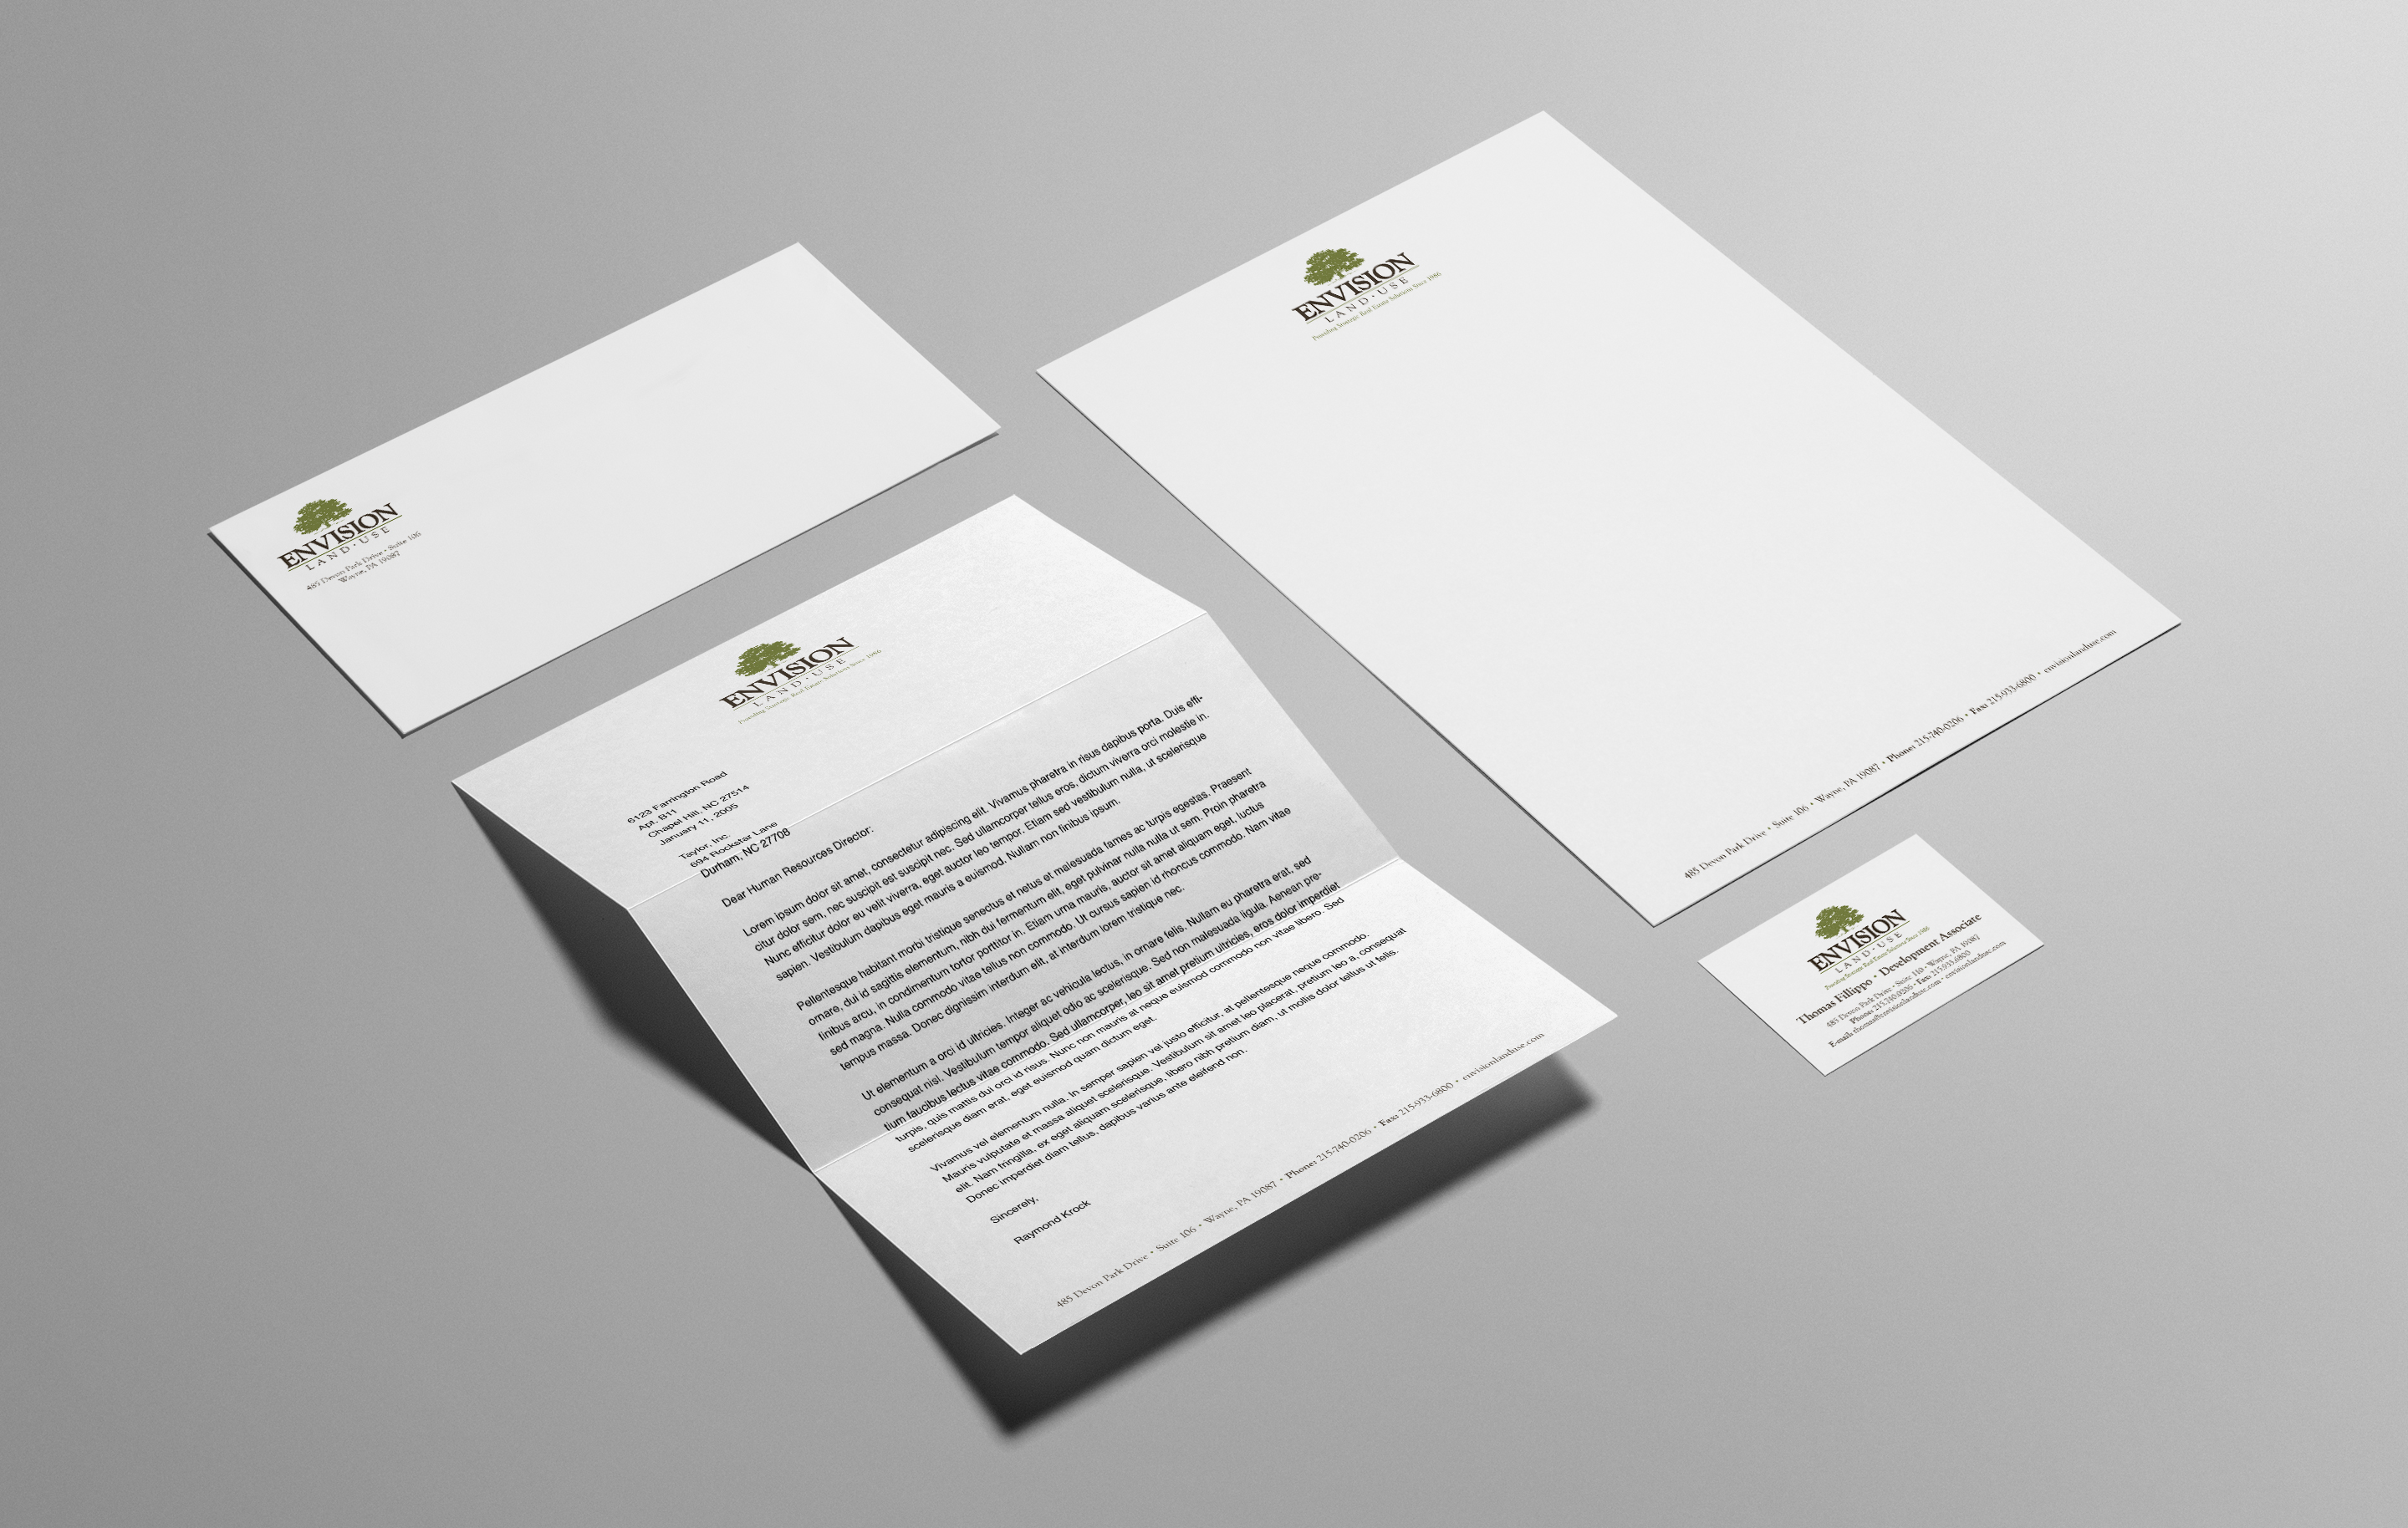 Envision Landscaping stationery design by advertising agency in Philadelphia